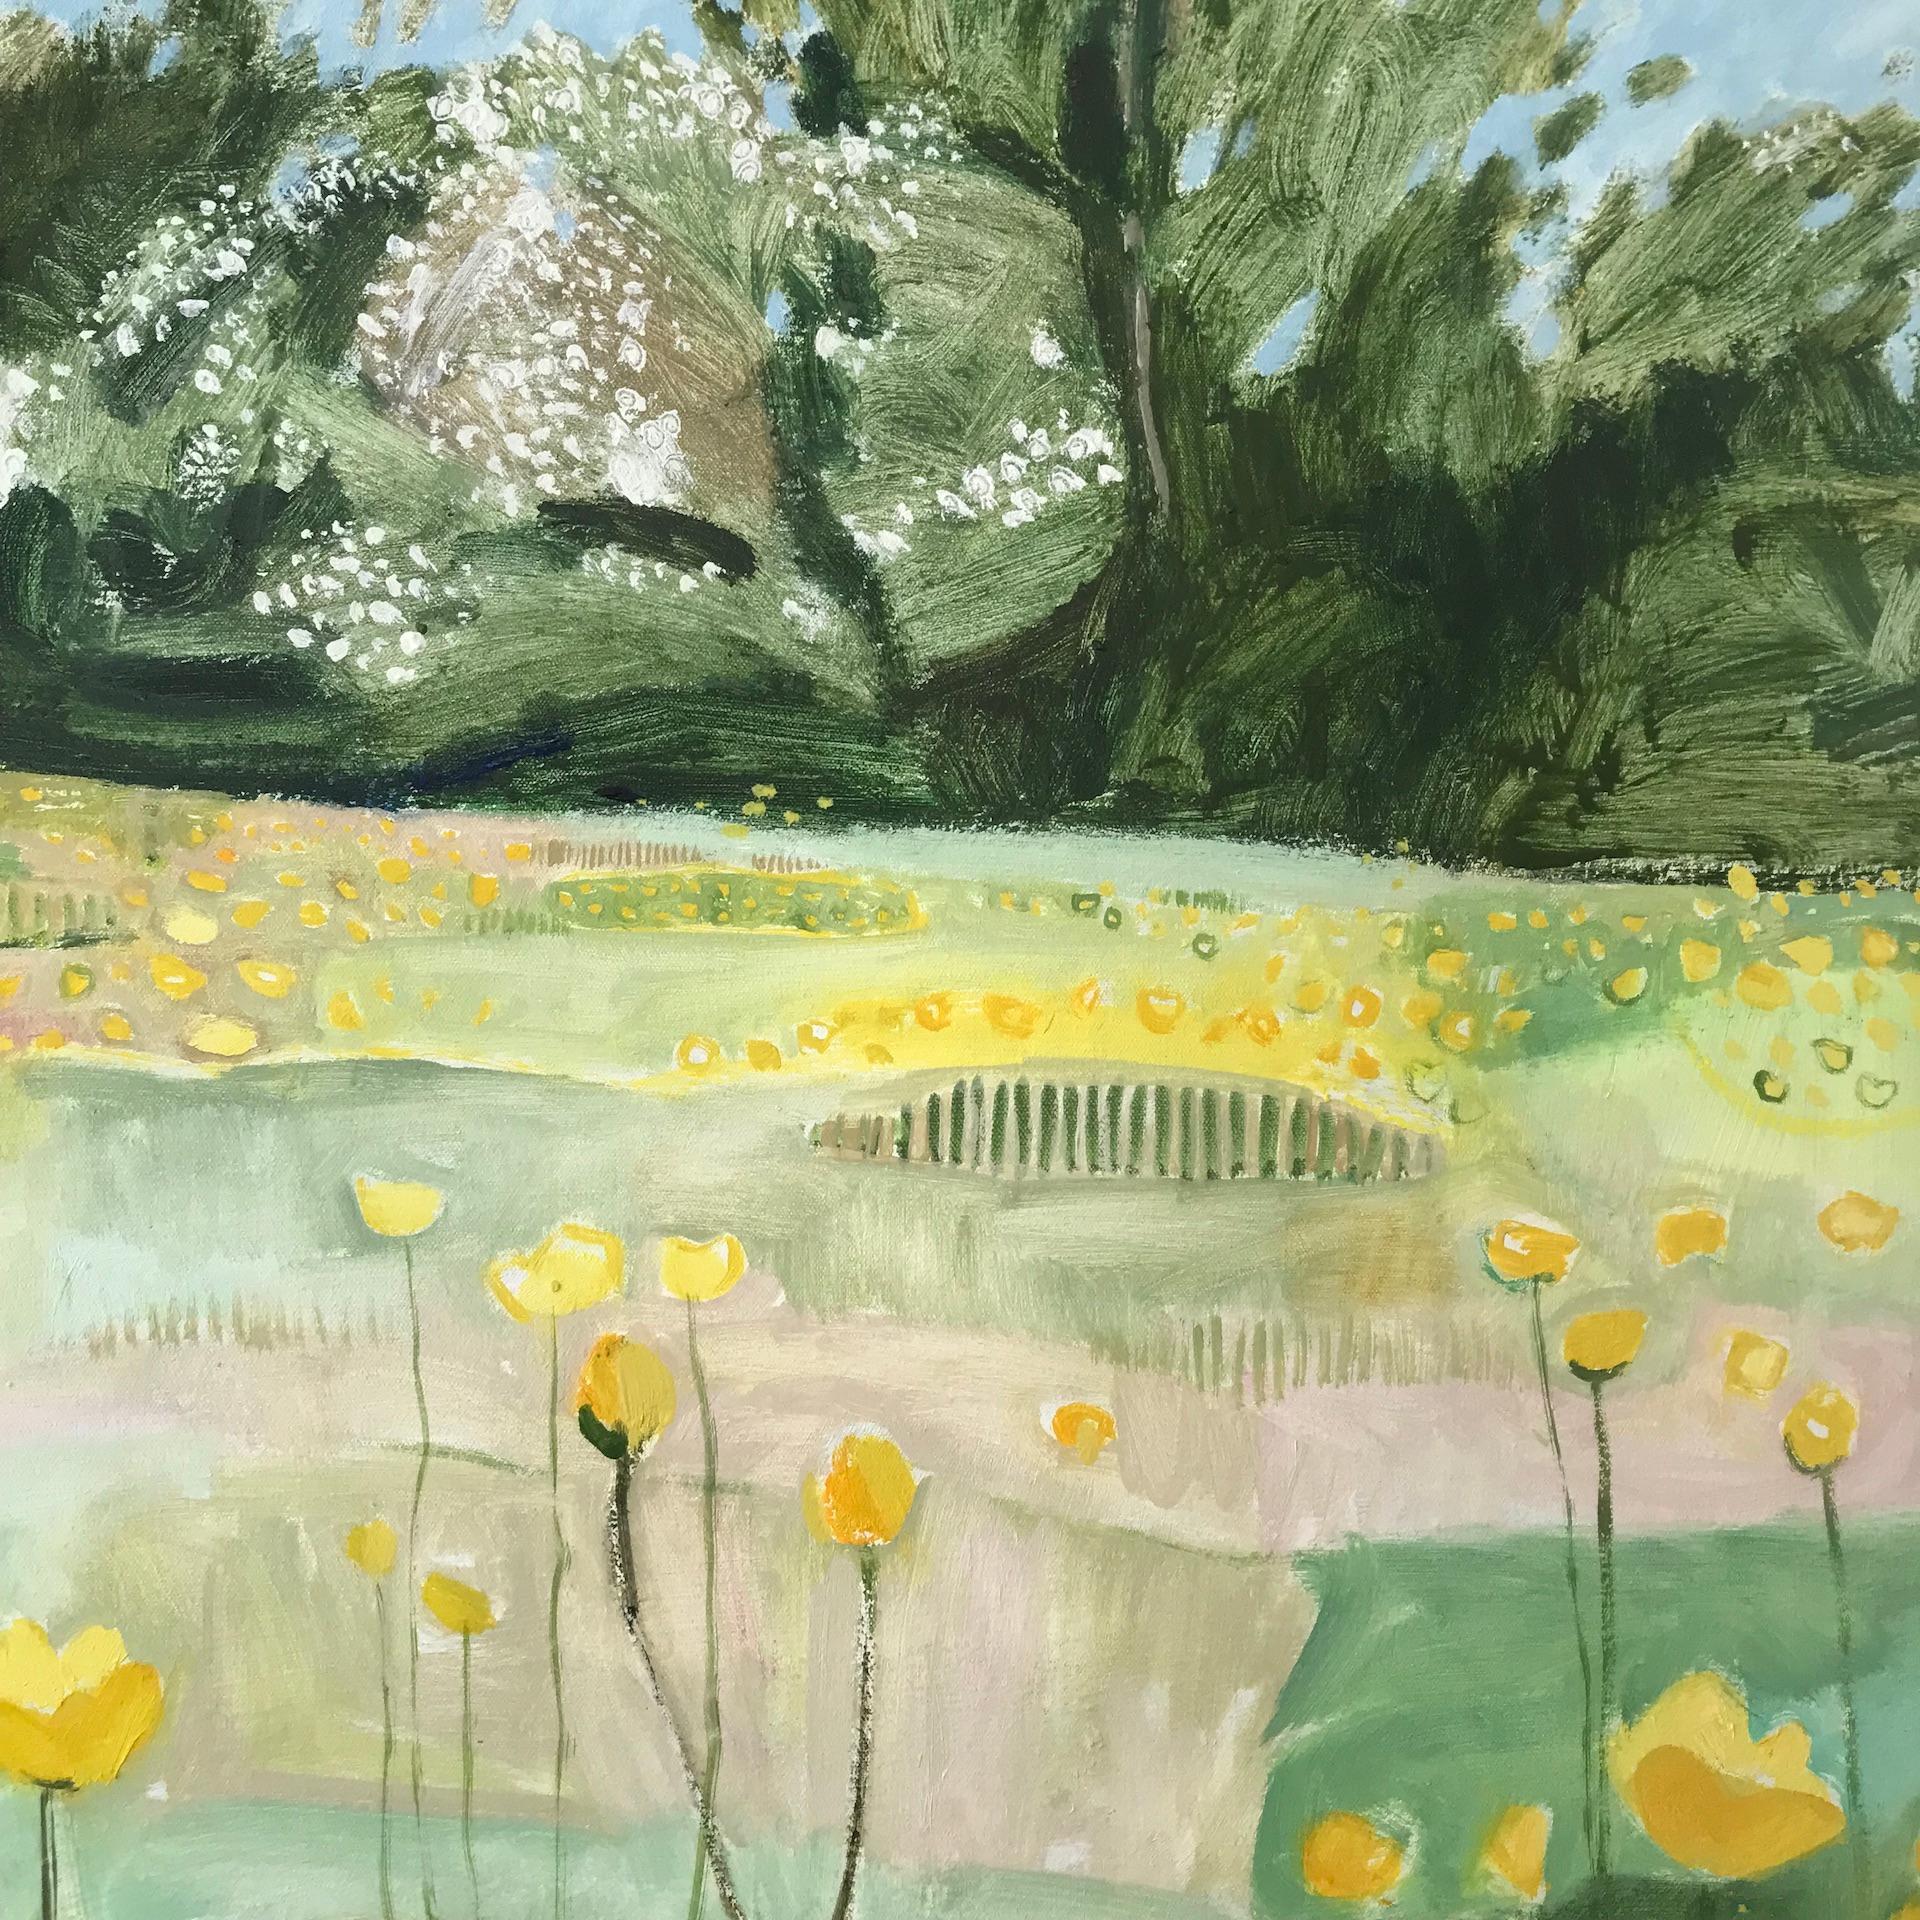 Just Buttercups by Elaine , Original art, Contemporary abstract art, Painting 1